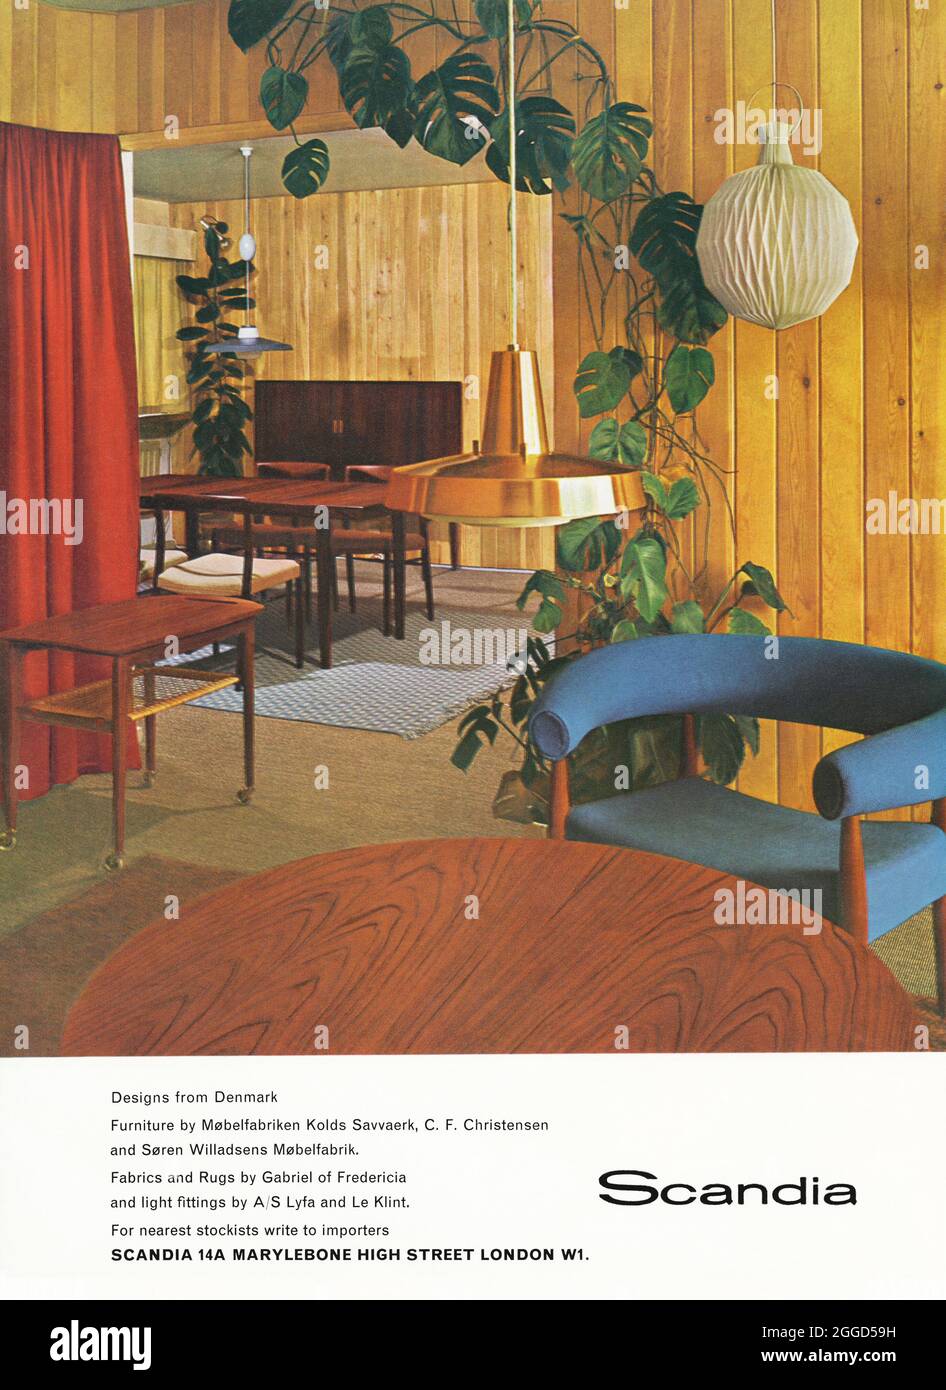 A 1960s advert for stylish, mid-century home furnishings made in Denmark – on display at the Scandia showroom, Marylebone High Street, London, England, UK. The advert appeared in a magazine published in the UK in October 1962. The photograph features furniture, lighting, rugs and carpets by leading Danish designers and producers such as Kolds Savvaerk, C F Christensen, Møbelfabrik and Le Klint – vintage 1960s graphics. Stock Photo